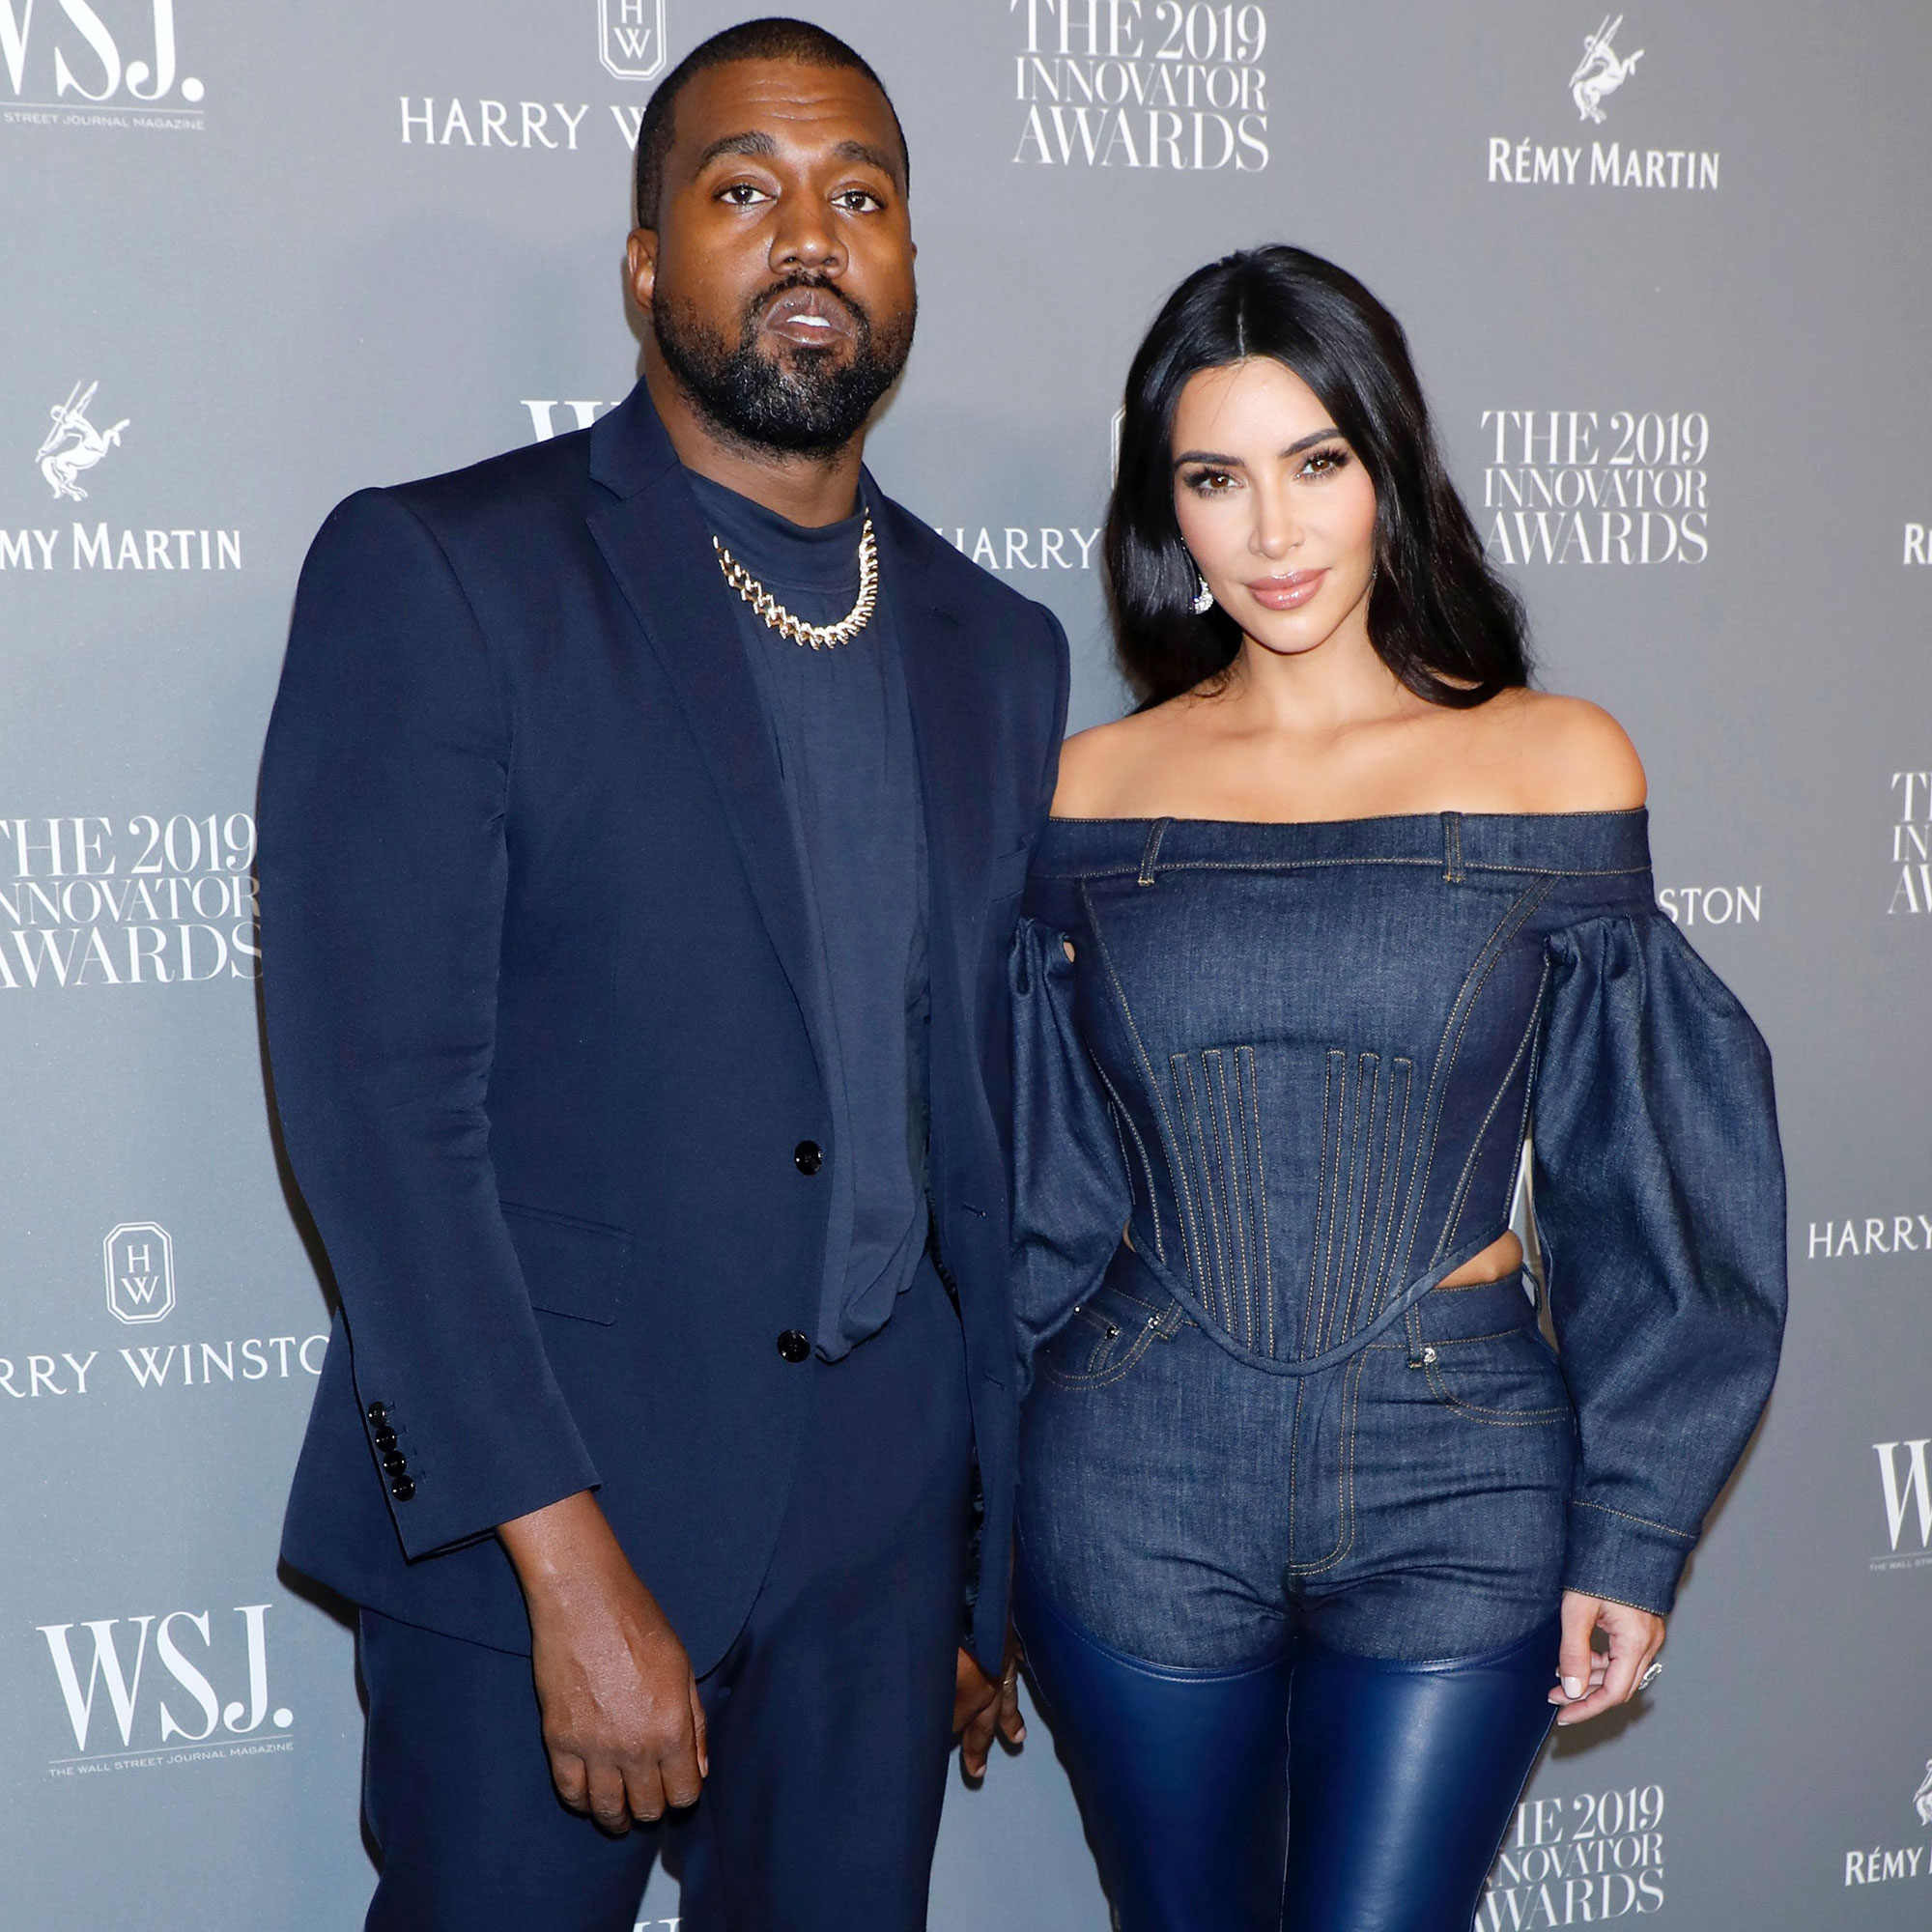 Kim Kardashian Fans Accuse Her Of Using Her 'Divorce' To Promote